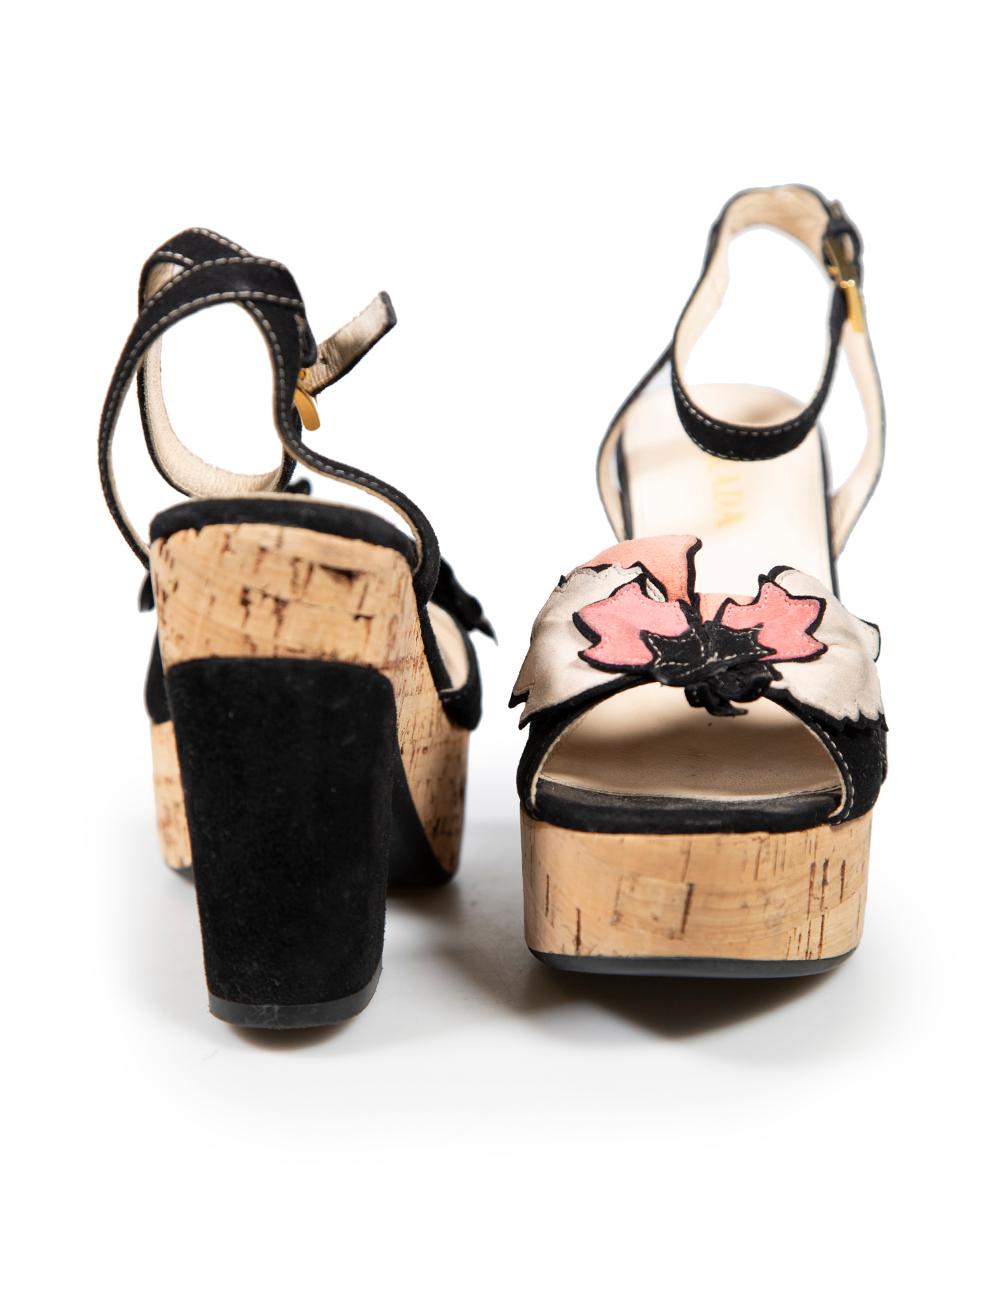 Prada Black Suede Flower Applique Cork Sandals Size IT 36 In Good Condition For Sale In London, GB